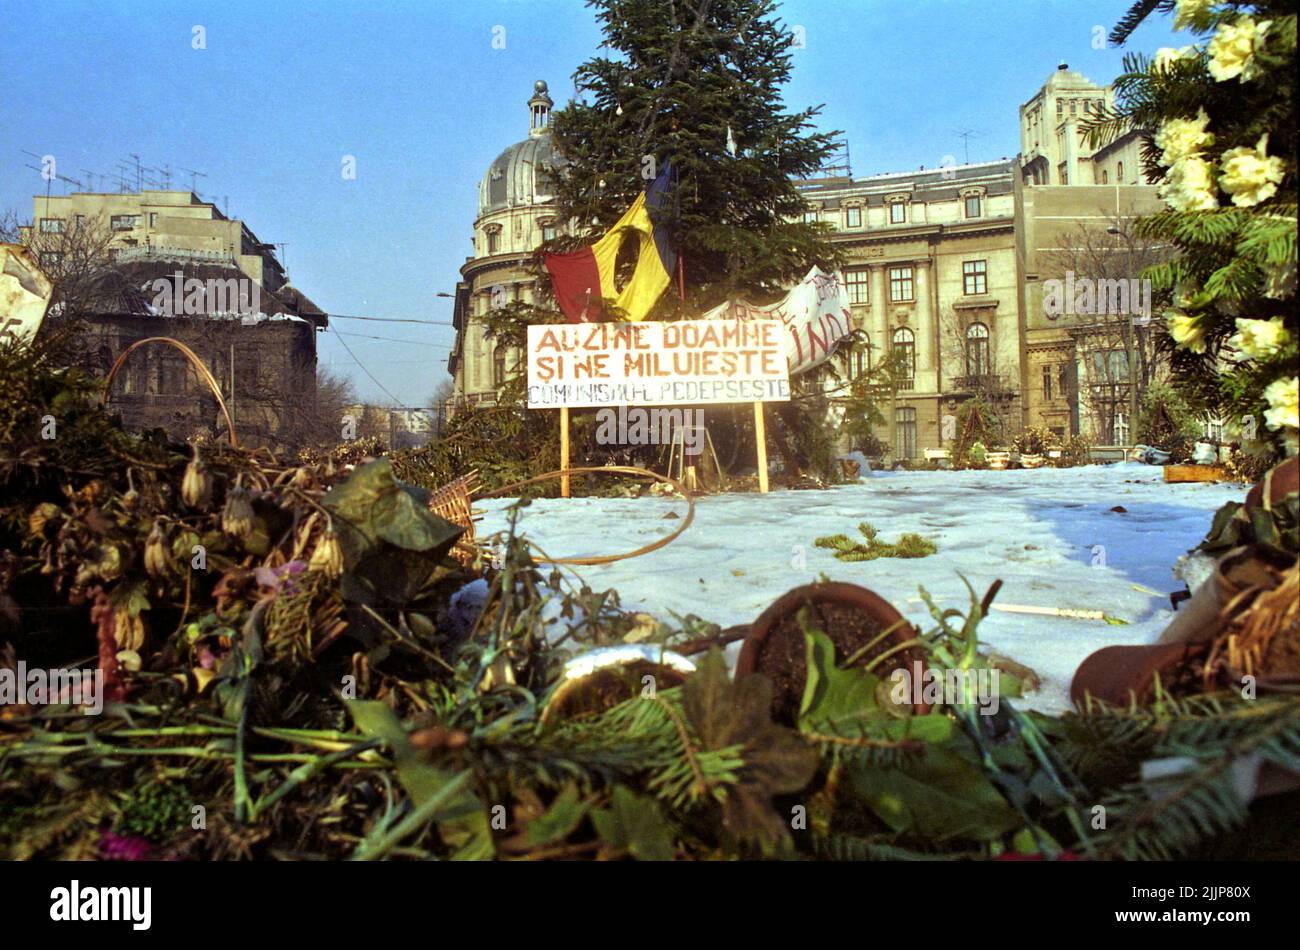 Bucharest, Romania, January 1990. Memorial for the victims of the Romanian anticommunist revolution of December 1989 in the University Square, one of the key points in the uprising.  Romanian flag with the Socialist emblem cut, an anti-communist symbol during the Romanian Revolution of 1989. Sign saying 'Hear us, Lord and have mercy, punish communism'. Stock Photo